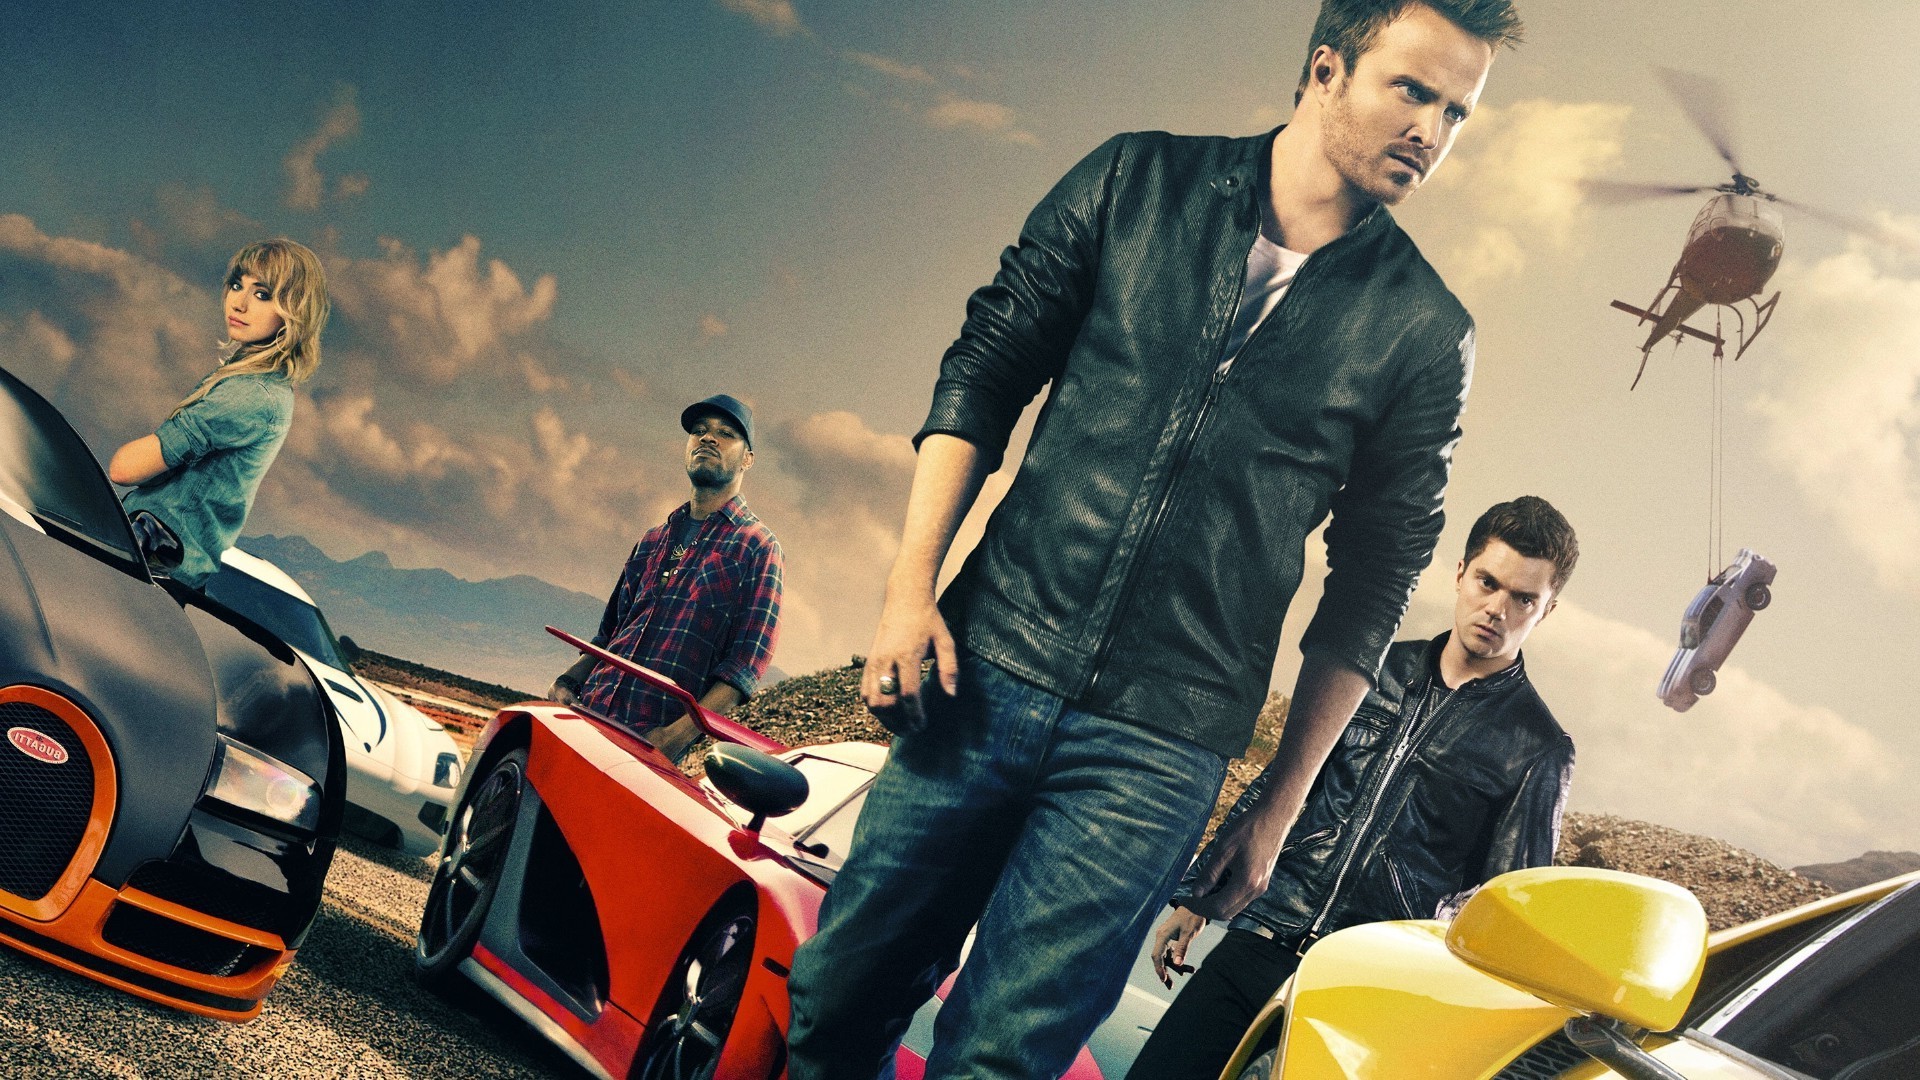 Need for speed 2 movie noredchecks